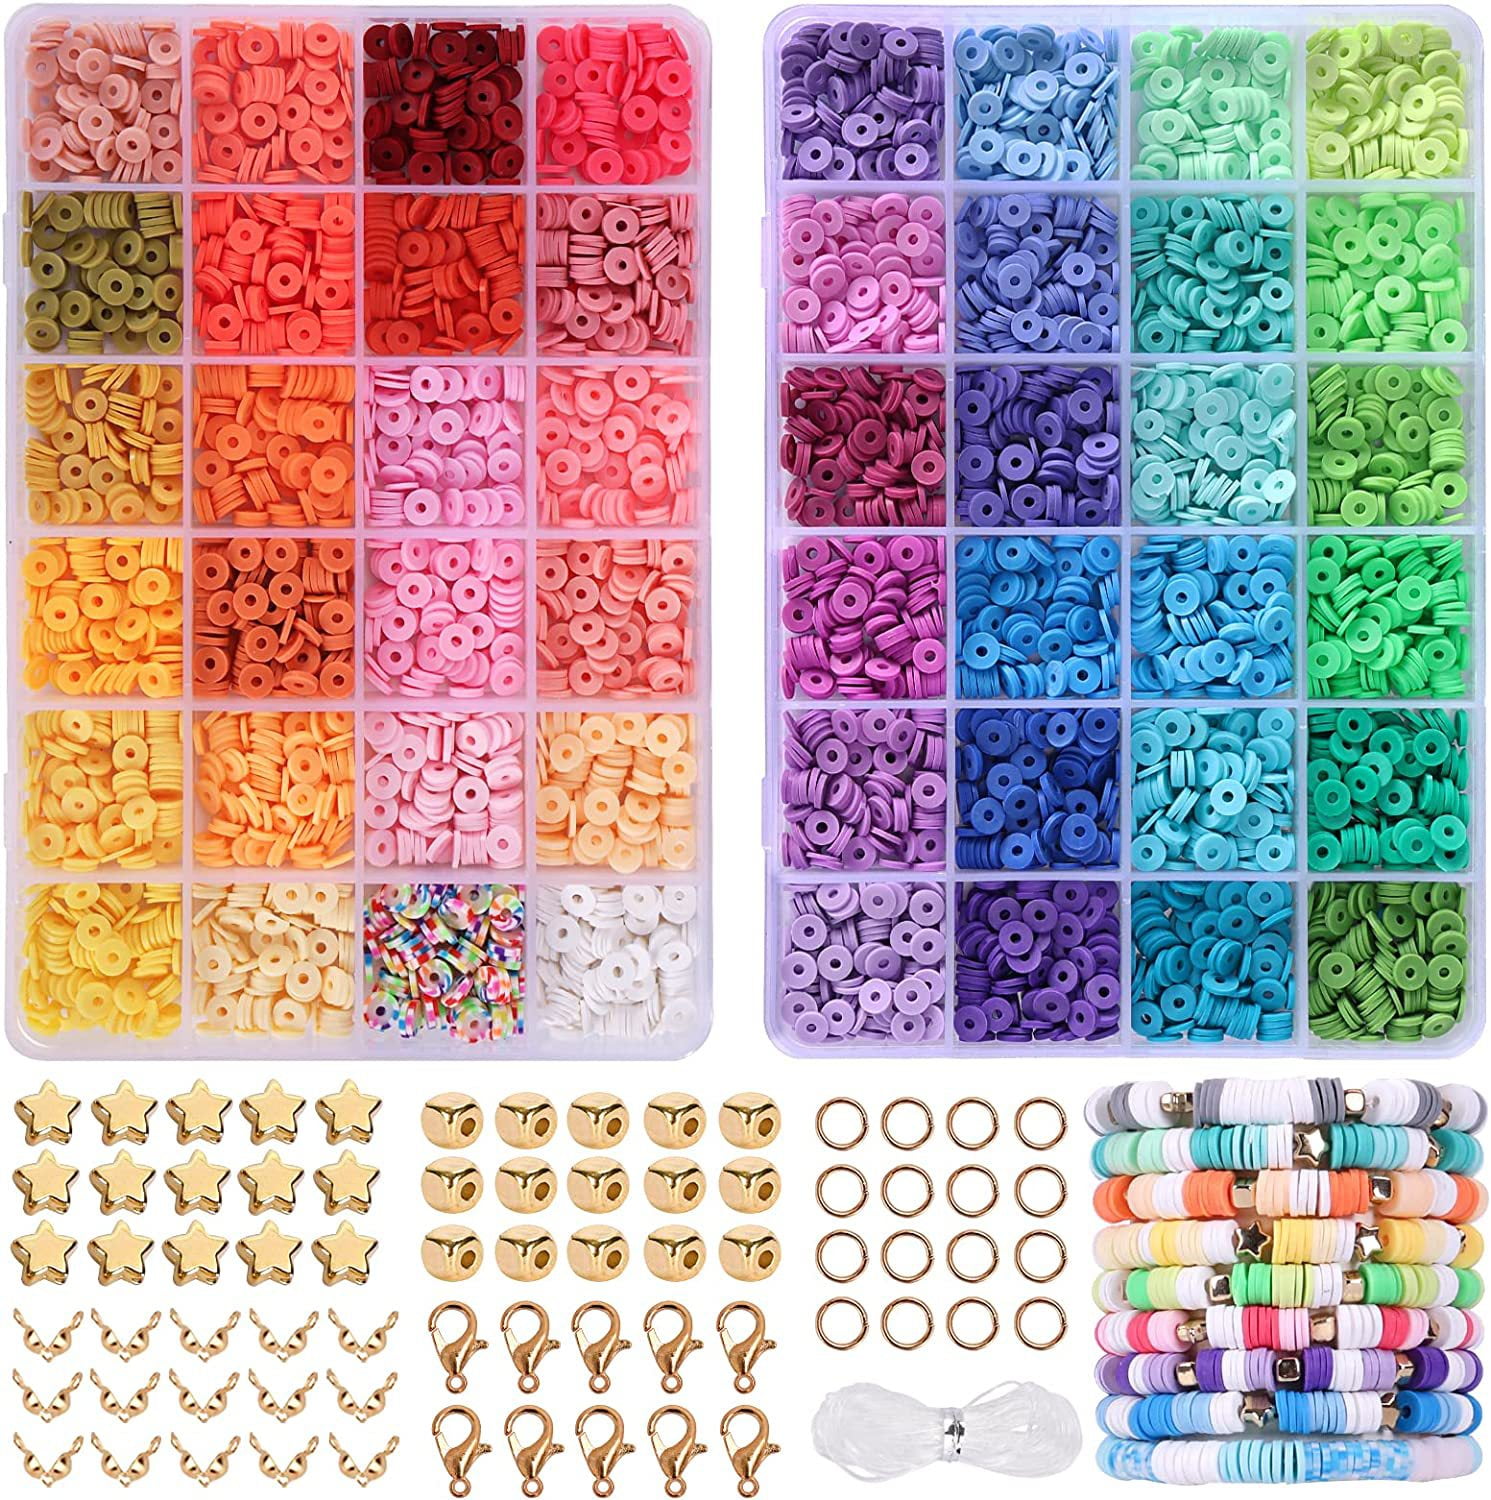 Playkidz Fuse Beads, Bulk Assorted Multicolor Melty Beads for Kids Crafts, Big Bucket of 22000 Pcs